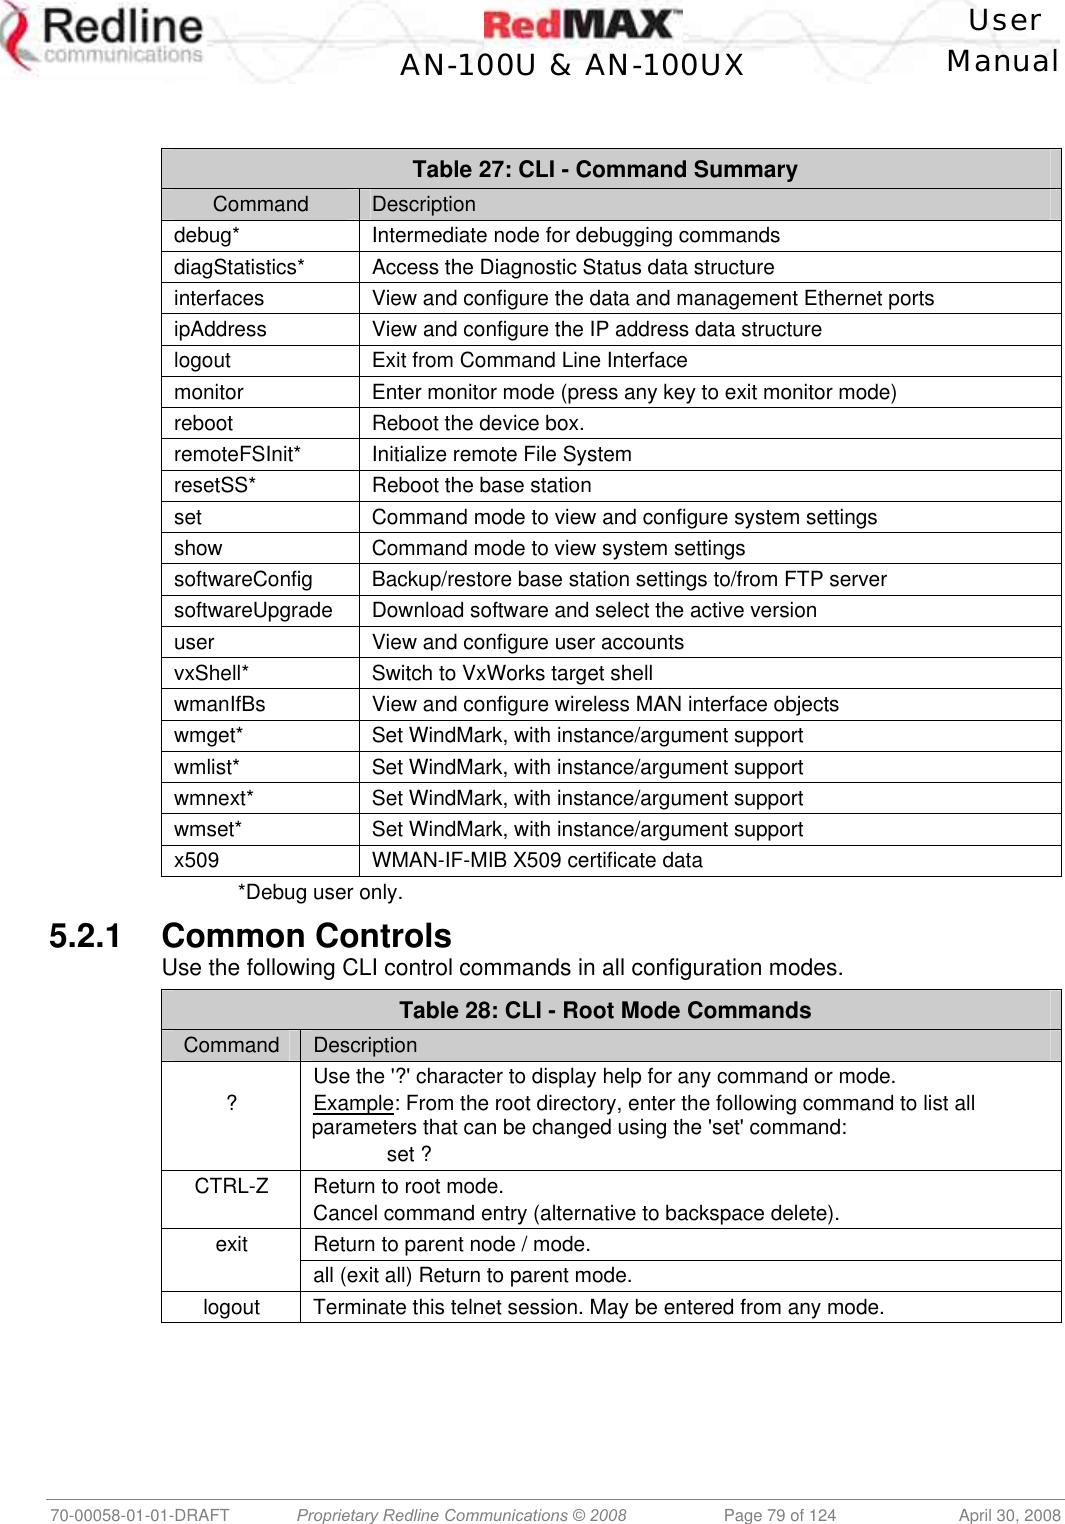    User  AN-100U &amp; AN-100UX Manual   70-00058-01-01-DRAFT  Proprietary Redline Communications © 2008   Page 79 of 124  April 30, 2008   Table 27: CLI - Command Summary Command  Description debug*  Intermediate node for debugging commands diagStatistics*  Access the Diagnostic Status data structure interfaces  View and configure the data and management Ethernet ports ipAddress View and configure the IP address data structure logout  Exit from Command Line Interface monitor  Enter monitor mode (press any key to exit monitor mode) reboot  Reboot the device box. remoteFSInit*  Initialize remote File System resetSS*  Reboot the base station  set  Command mode to view and configure system settings show  Command mode to view system settings softwareConfig  Backup/restore base station settings to/from FTP server softwareUpgrade  Download software and select the active version user  View and configure user accounts vxShell*  Switch to VxWorks target shell wmanIfBs  View and configure wireless MAN interface objects wmget*  Set WindMark, with instance/argument support wmlist*  Set WindMark, with instance/argument support wmnext*  Set WindMark, with instance/argument support wmset*  Set WindMark, with instance/argument support x509  WMAN-IF-MIB X509 certificate data *Debug user only. 5.2.1 Common Controls Use the following CLI control commands in all configuration modes. Table 28: CLI - Root Mode Commands Command  Description  ? Use the &apos;?&apos; character to display help for any command or mode. Example: From the root directory, enter the following command to list all parameters that can be changed using the &apos;set&apos; command:  set ? CTRL-Z  Return to root mode. Cancel command entry (alternative to backspace delete). Return to parent node / mode. exit  all (exit all) Return to parent mode. logout  Terminate this telnet session. May be entered from any mode.  